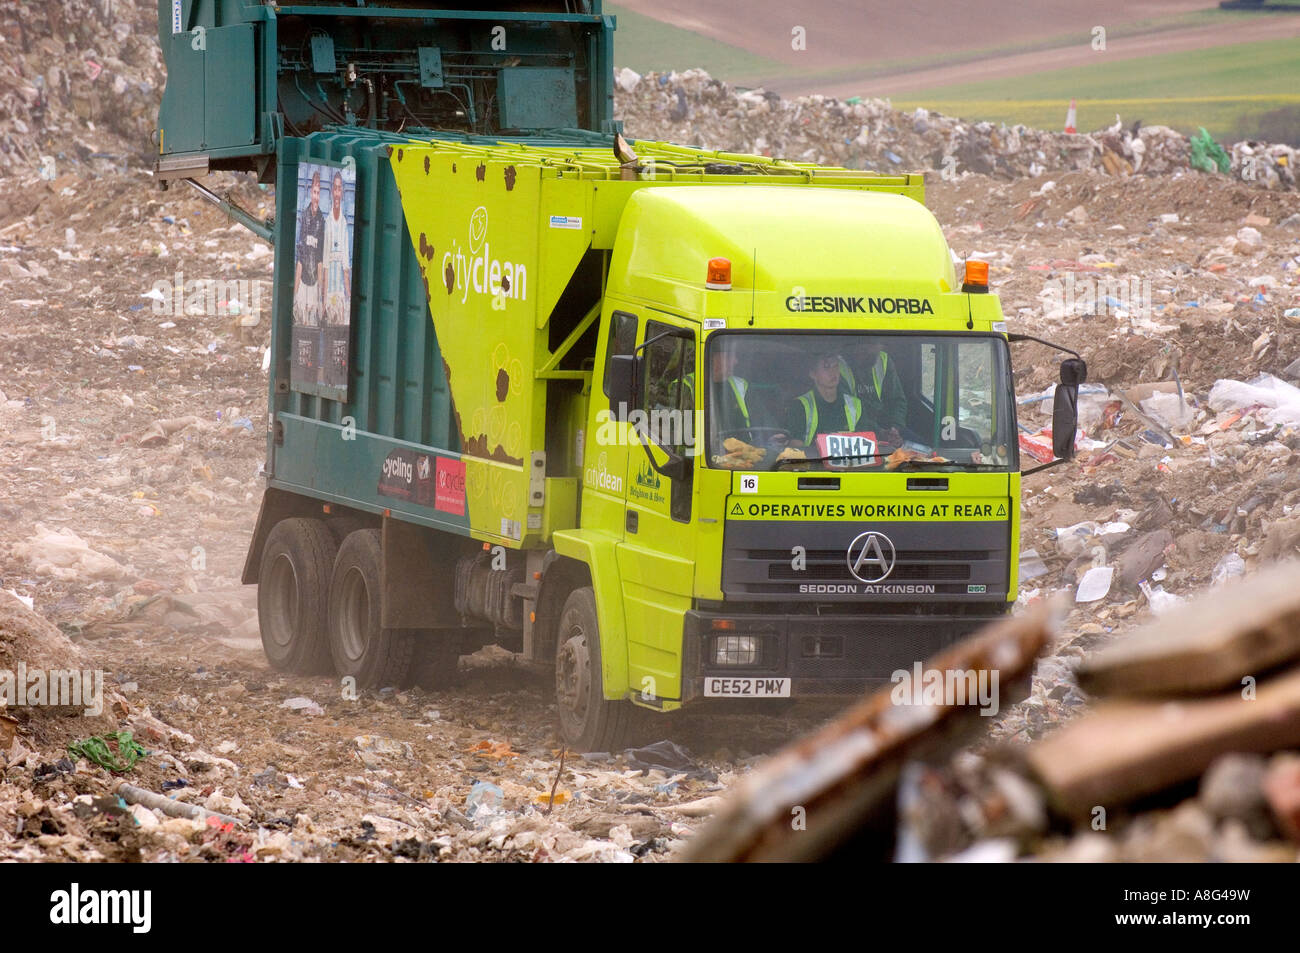 A busy landfill site in action with dustcarts refuse trucks and bulldozers. Beddingham, South East UK. Stock Photo